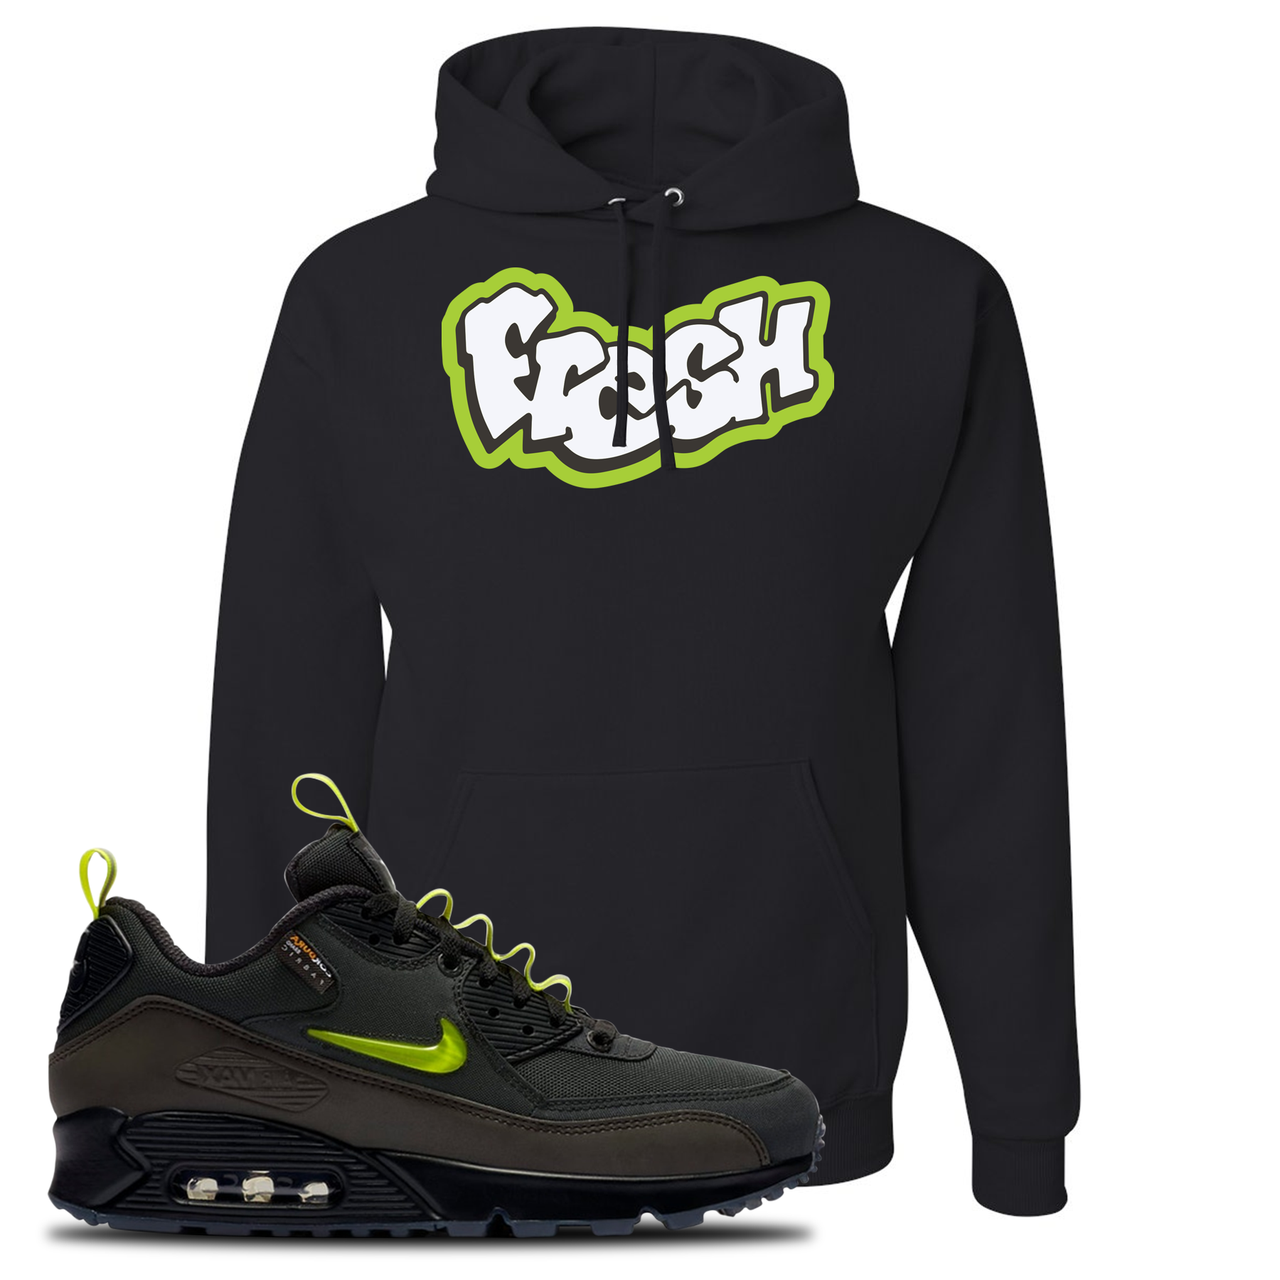 The Basement X Air Max 90 Manchester Fresh Black Sneaker Hook Up Pullover Hoodie